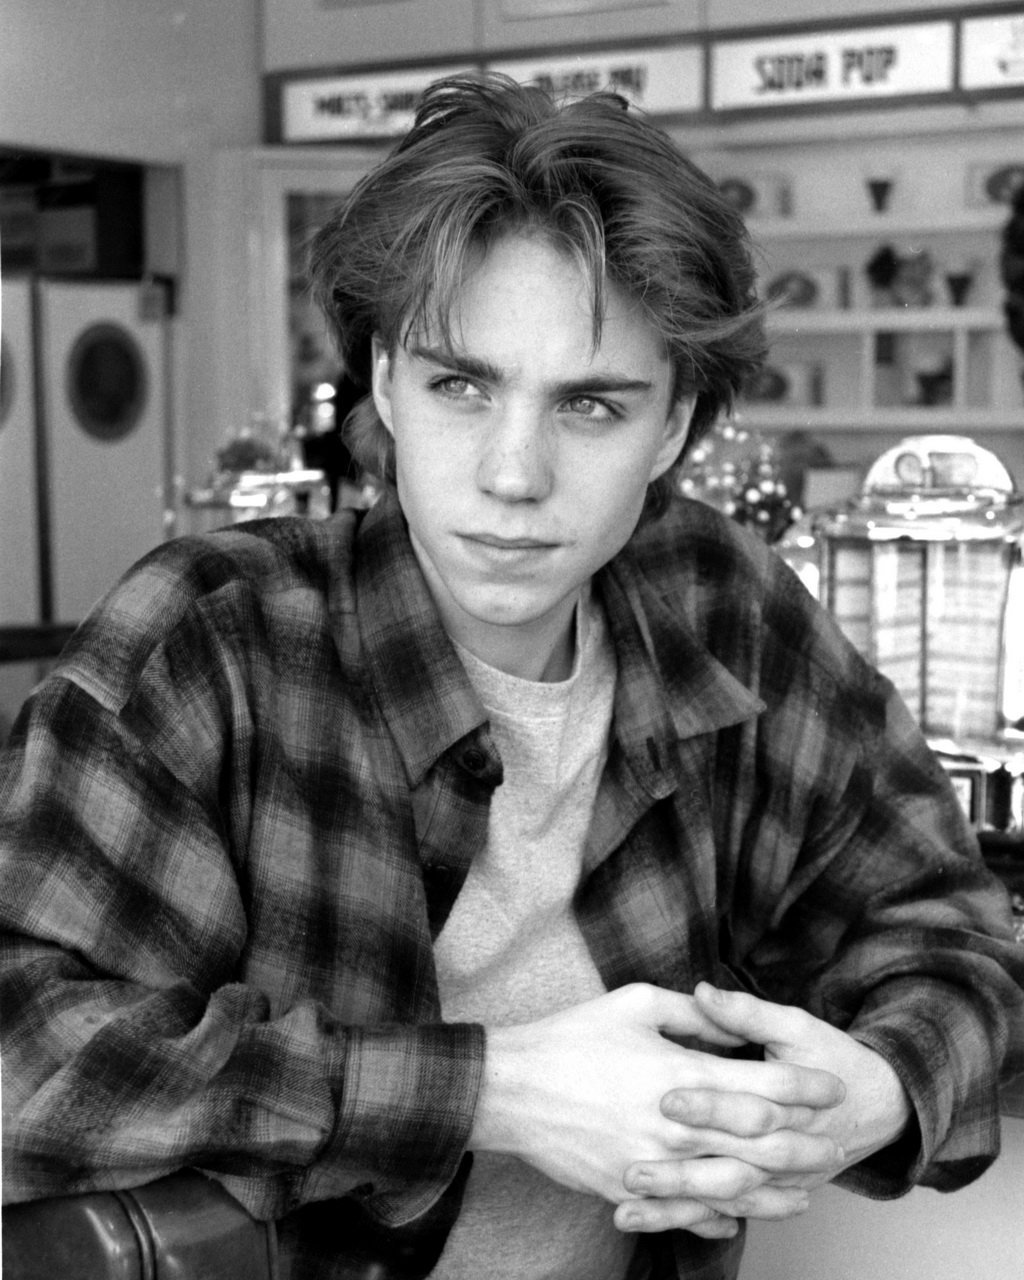 Jonathan Brandis Dec.1993 in a Ventura Blvd diner in Los Angeles | Photo: Wikimedia Commons Images, CC BY-SA 3.0